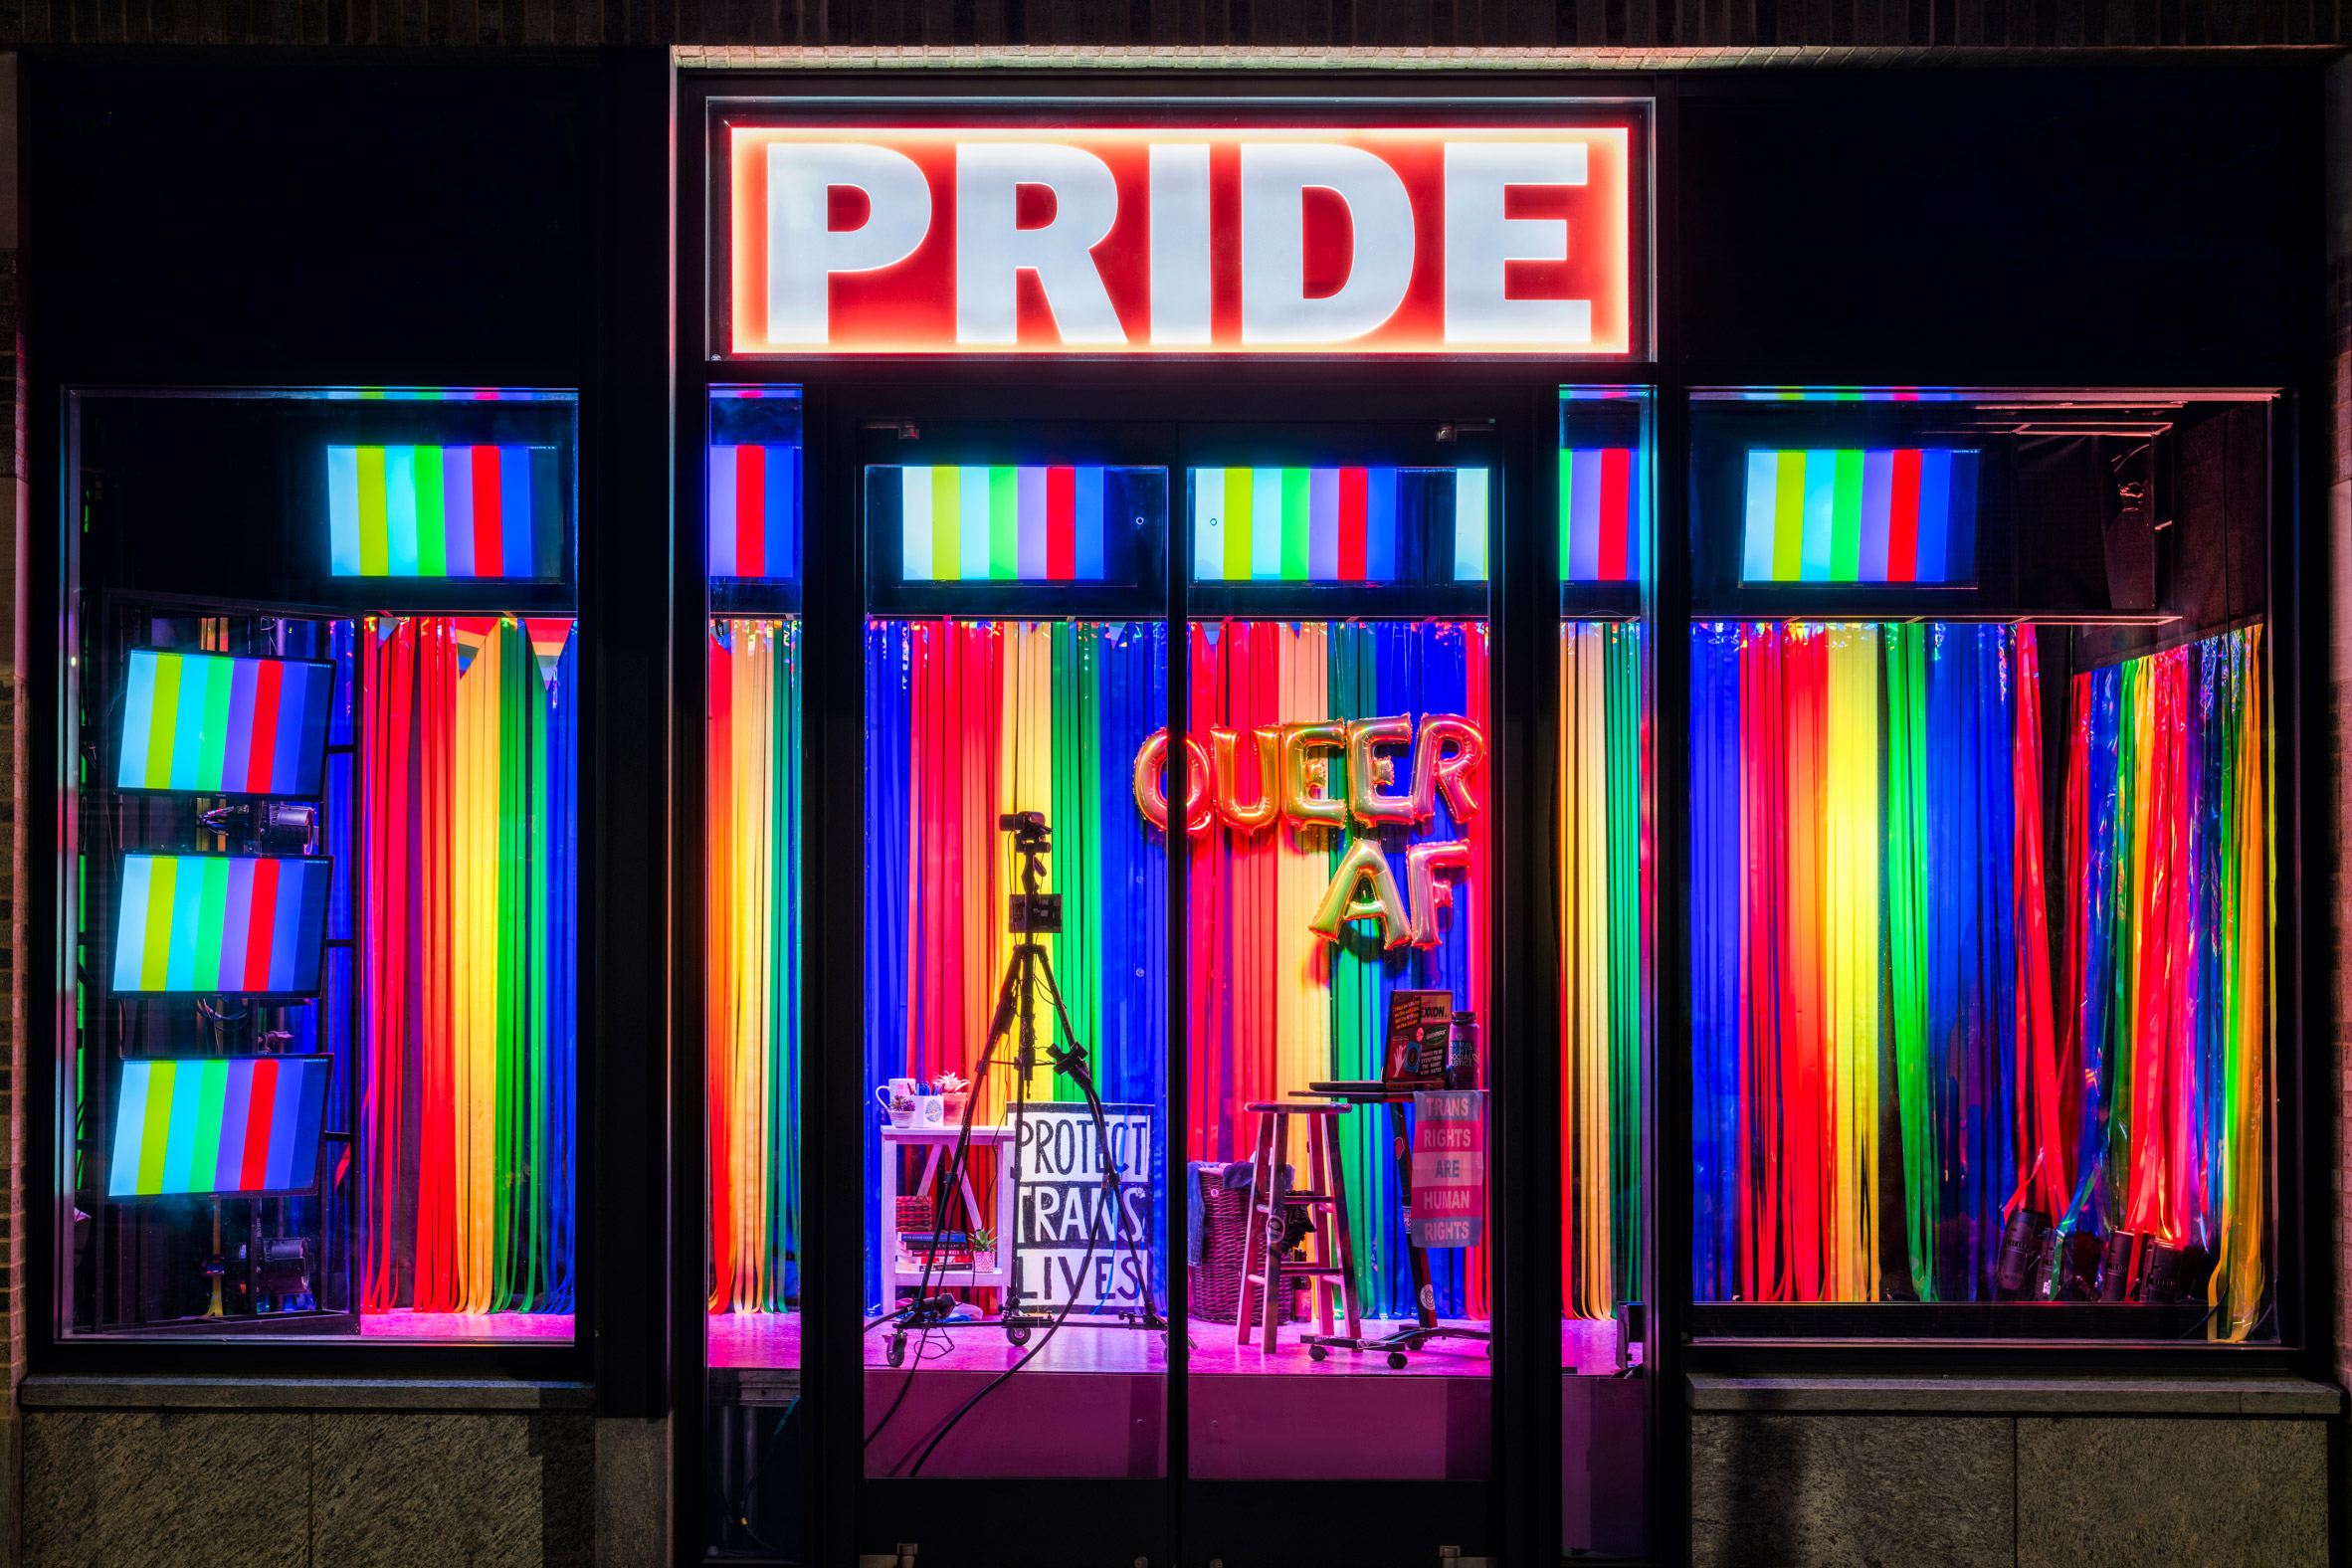 Pride features trans flags and Pride bunting